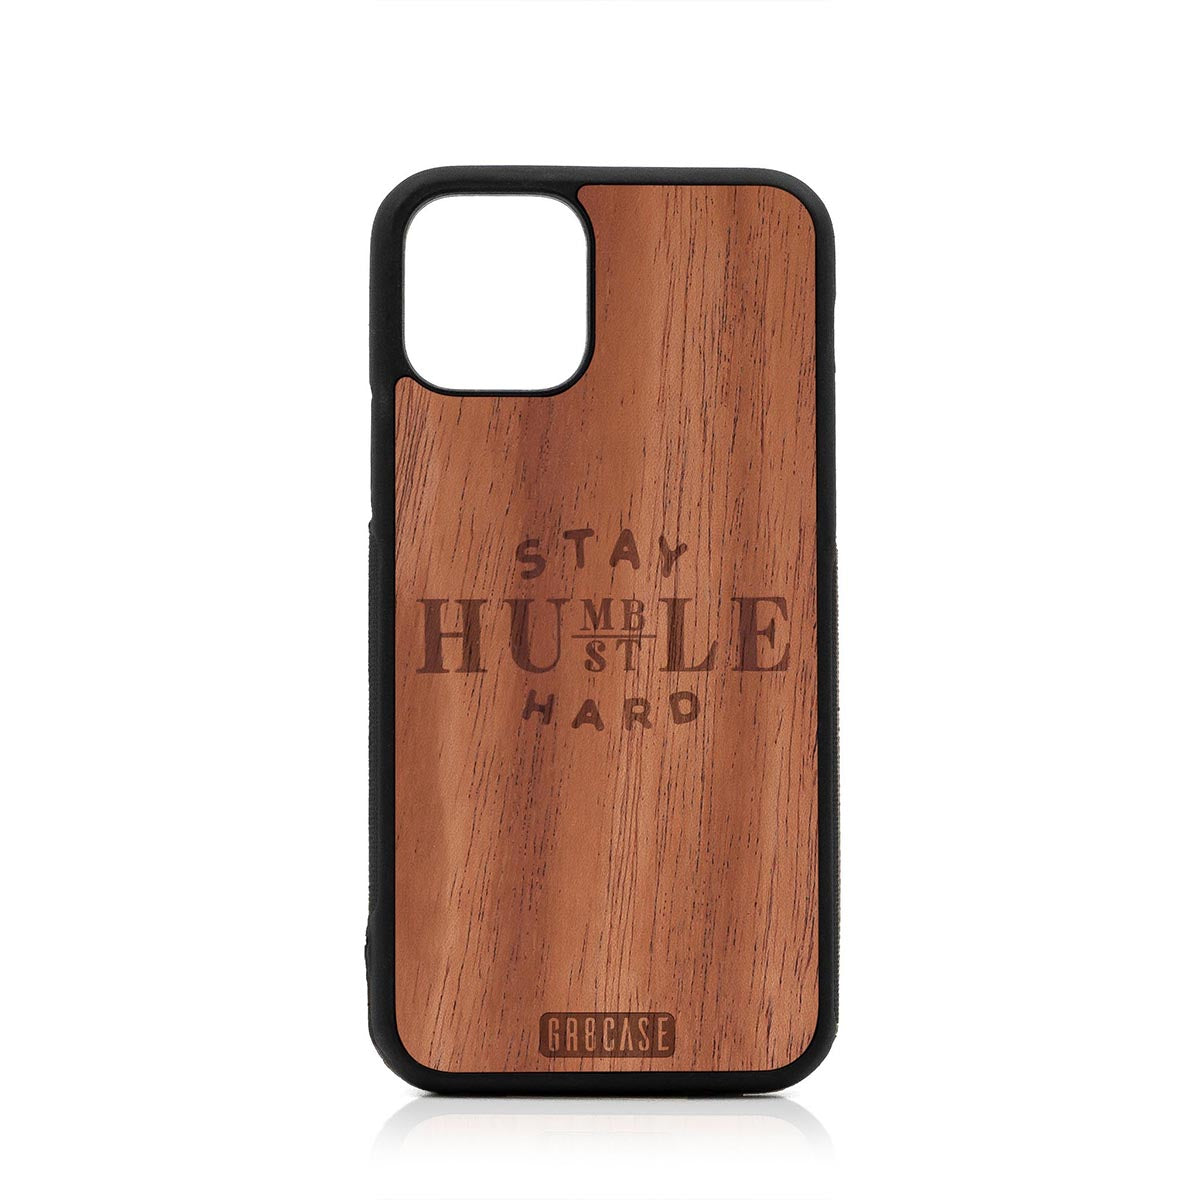 Stay Humble Hustle Hard Design Wood Case For iPhone 11 Pro by GR8CASE